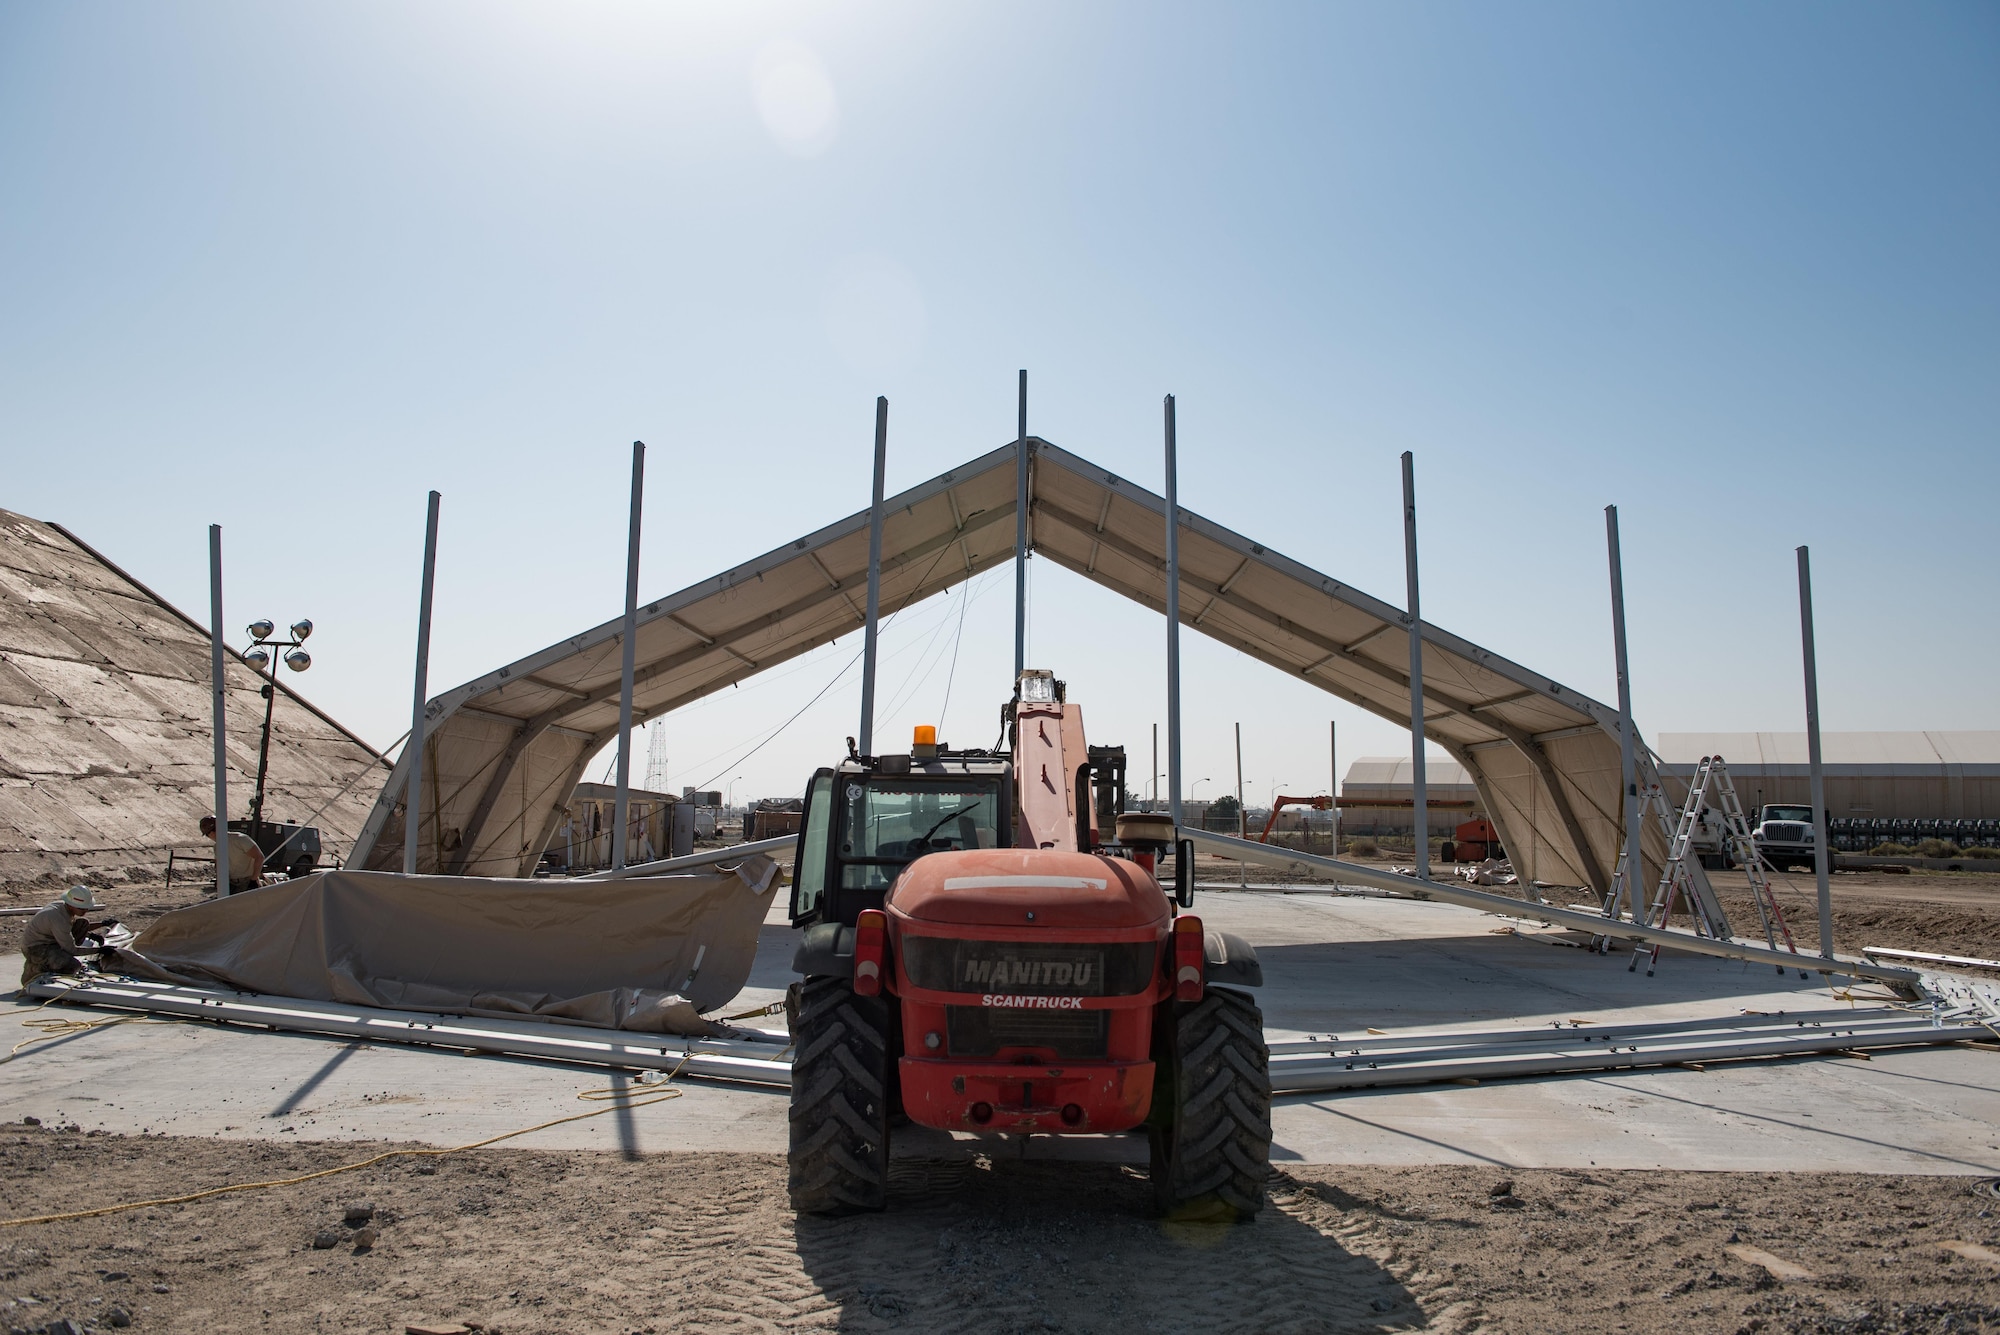 Airmen assigned to the 407th Expeditionary Civil Engineer Squadron and 577th Expeditionary Prime Beef Squadron install canvas on a new 4k dome at the 407th Air Expeditionary Group, March 21, 2017. The new structure will provide 4,000 square feet of covered area to maintain vehicles operating in support of Operation Inherent Resolve.  (U.S. Air Force photo/Master Sgt. Benjamin Wilson)(Released)